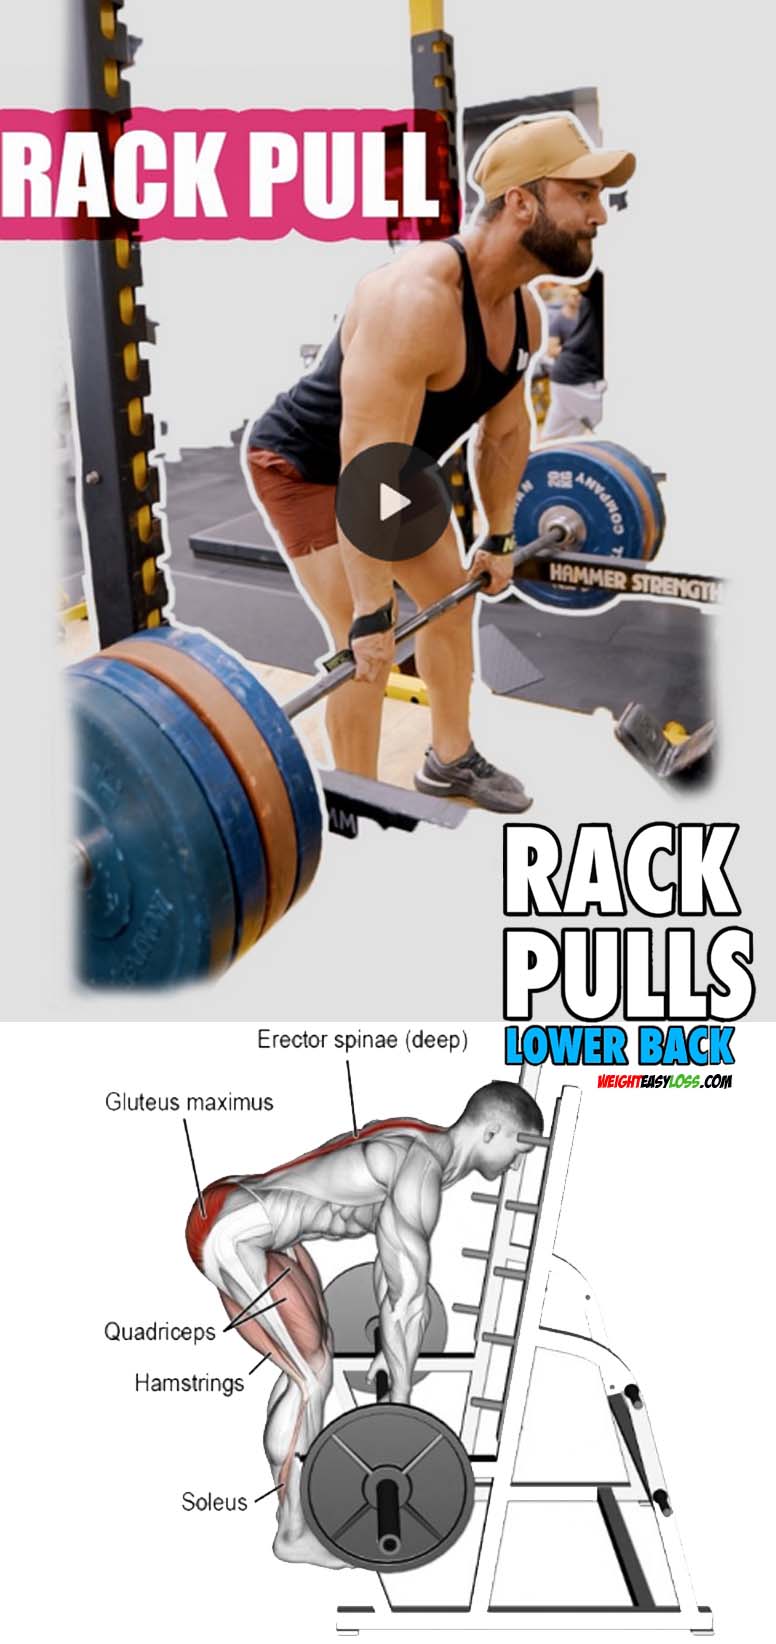 RACK PULLS FOR BACK THICKNESS